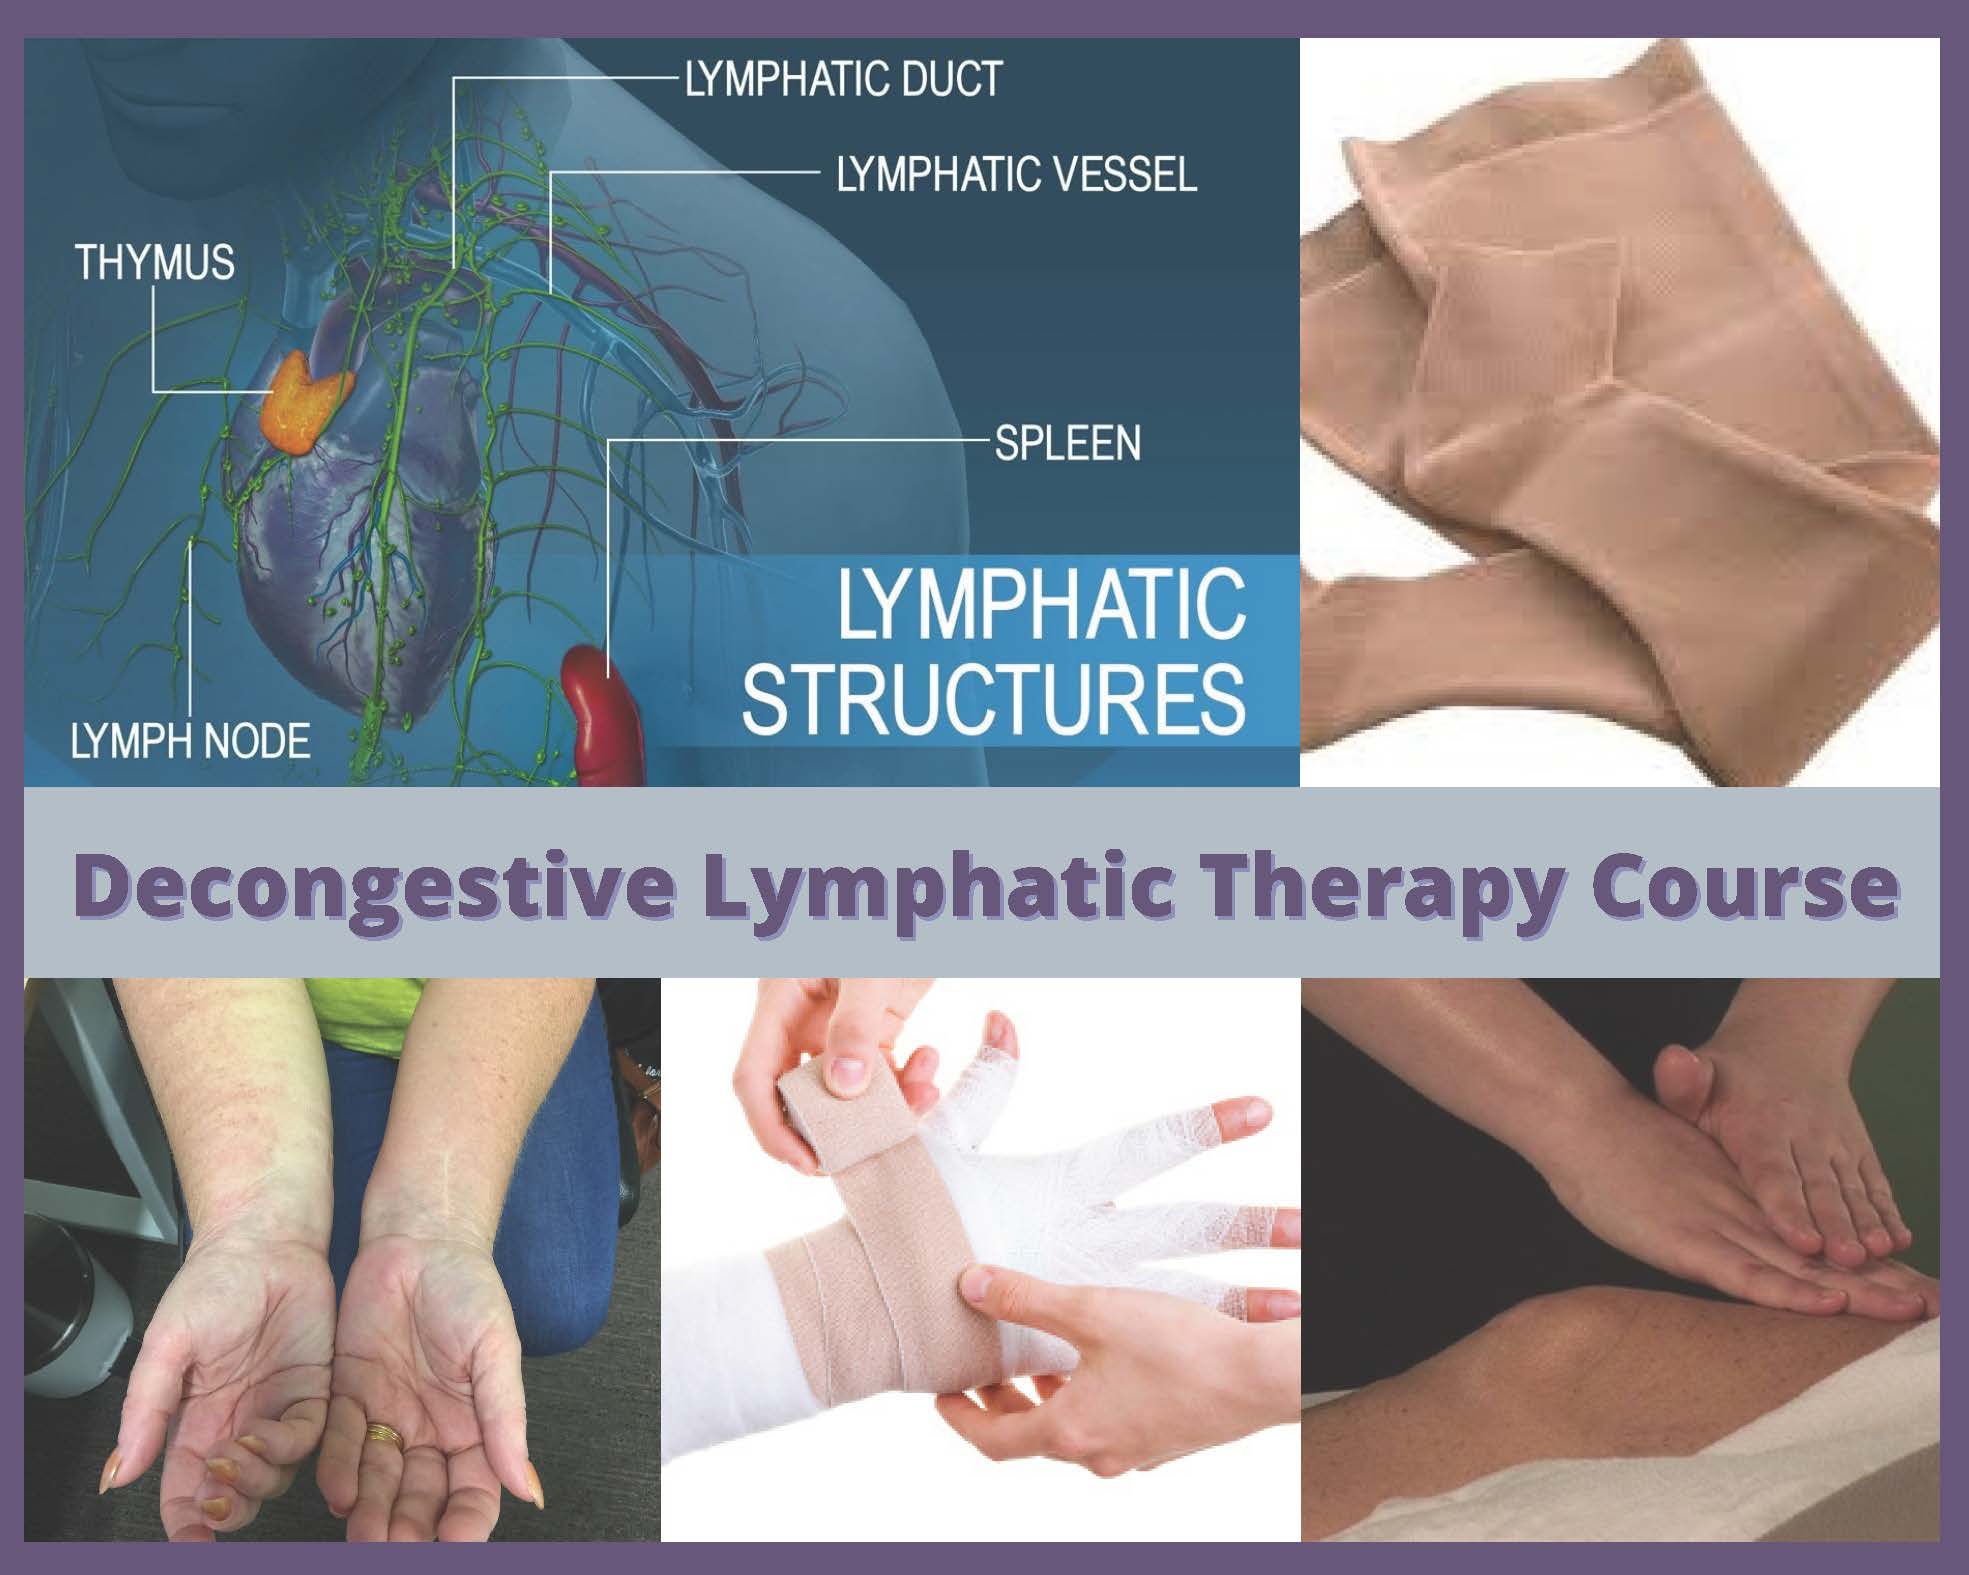 Decongestive Lymphatic Therapy